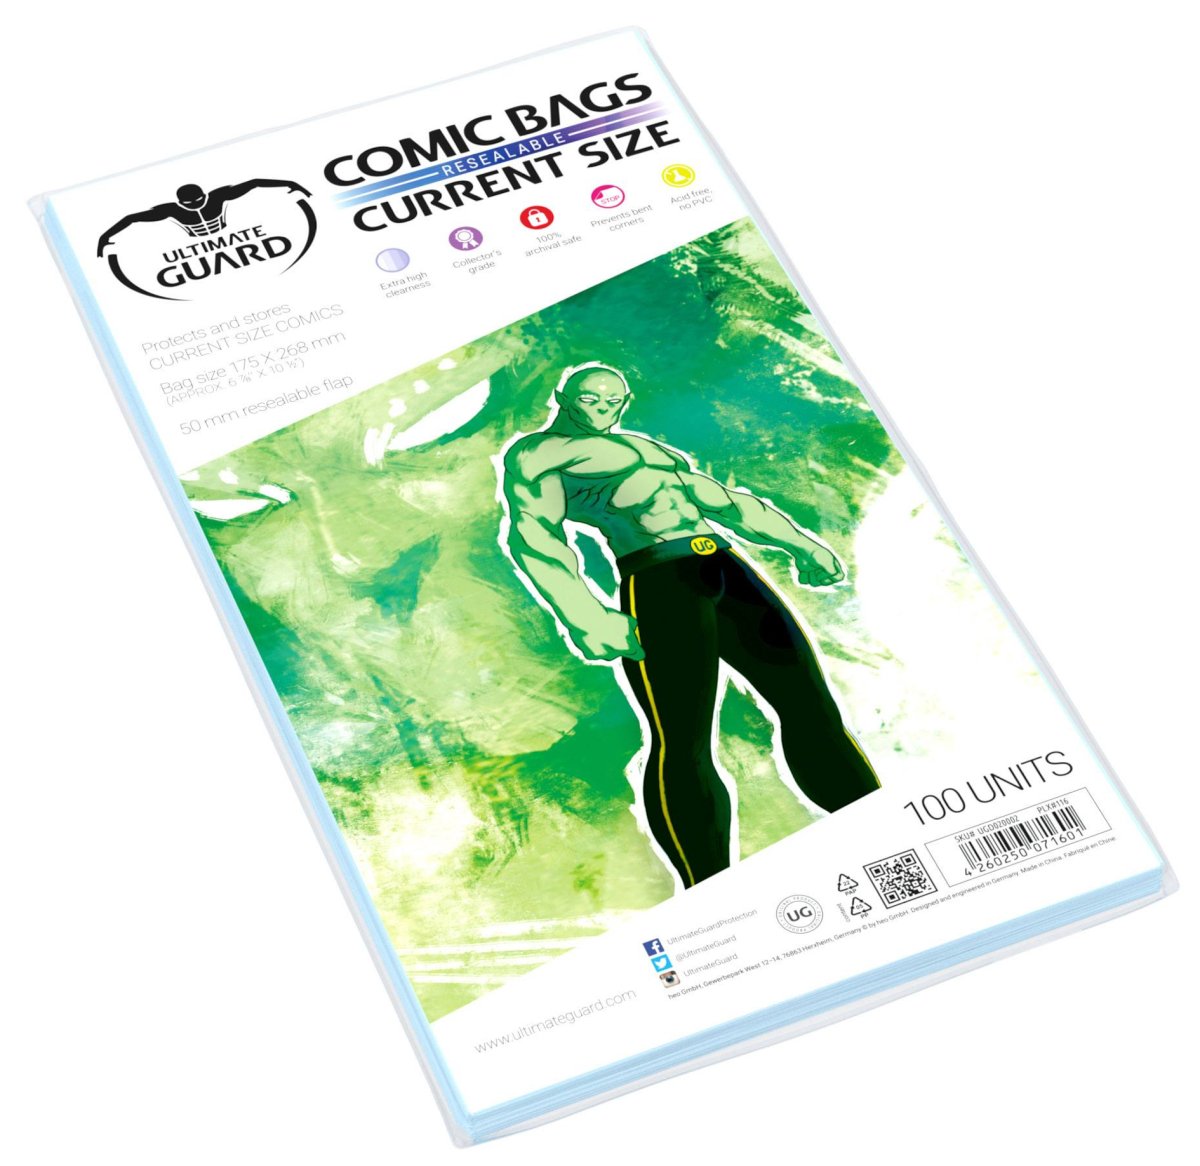 What Size of Bags and Boards Do I Need to Protect my Comic Books? - BCW  Supplies - Blog